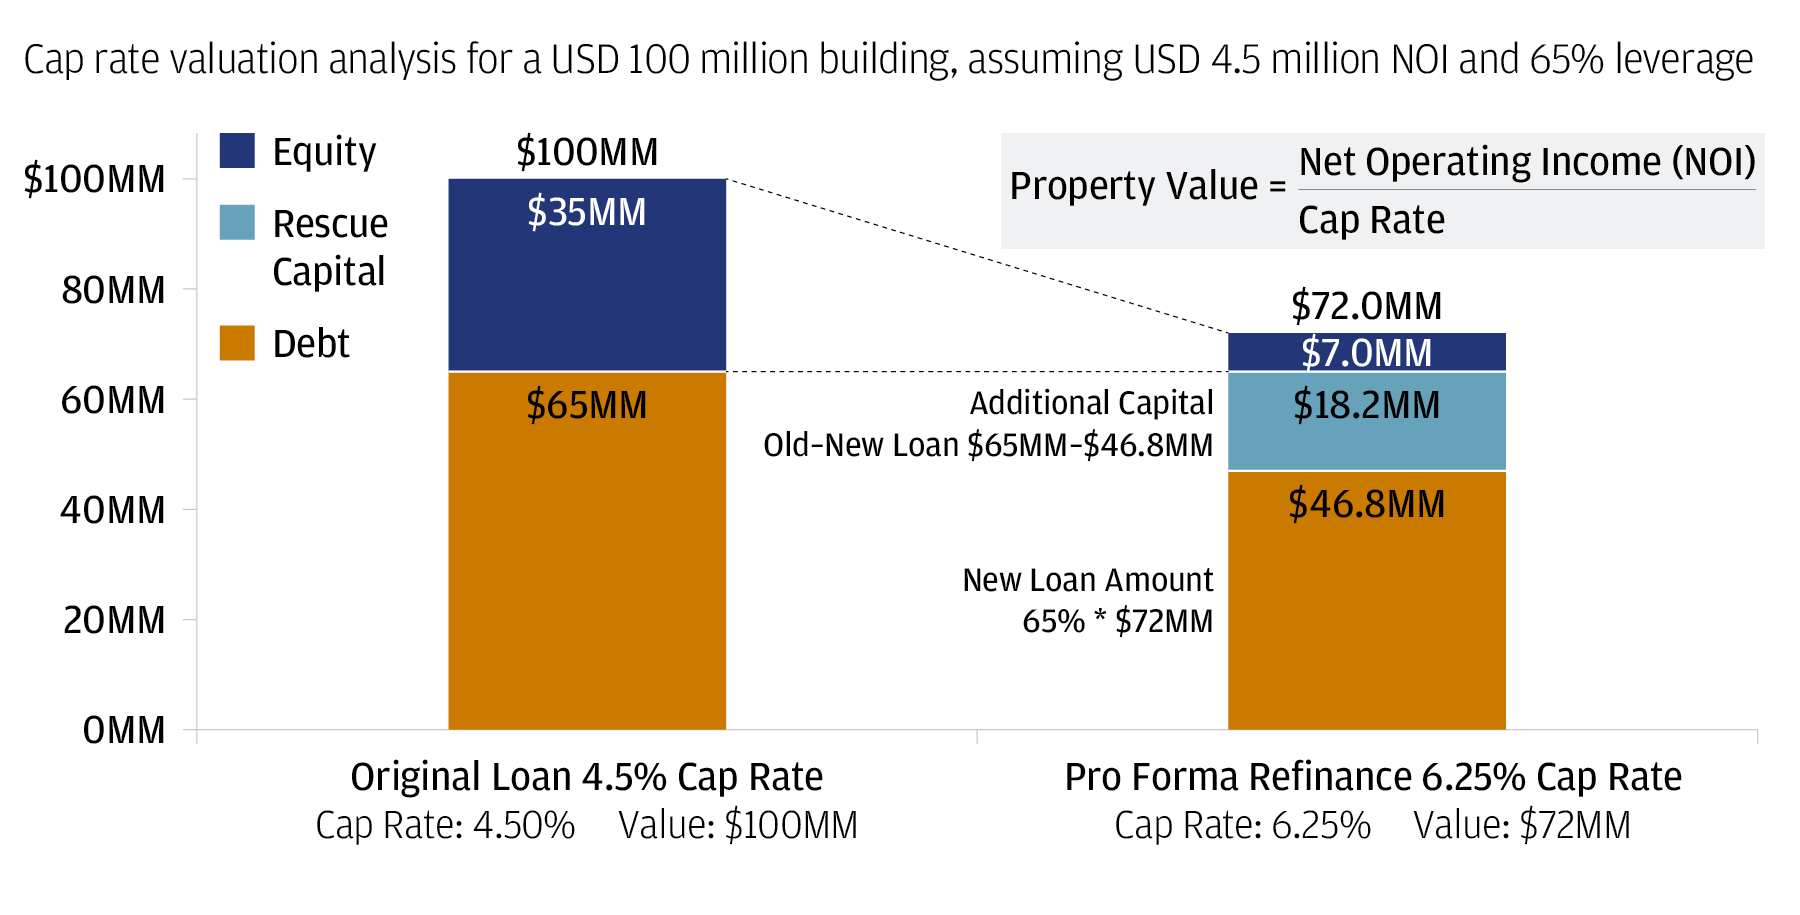 The chart describes a cap rate valuation analysis. In the column on the left, the valuation is for a total of $100mn in which $65mn is debt and $35mn is equity.